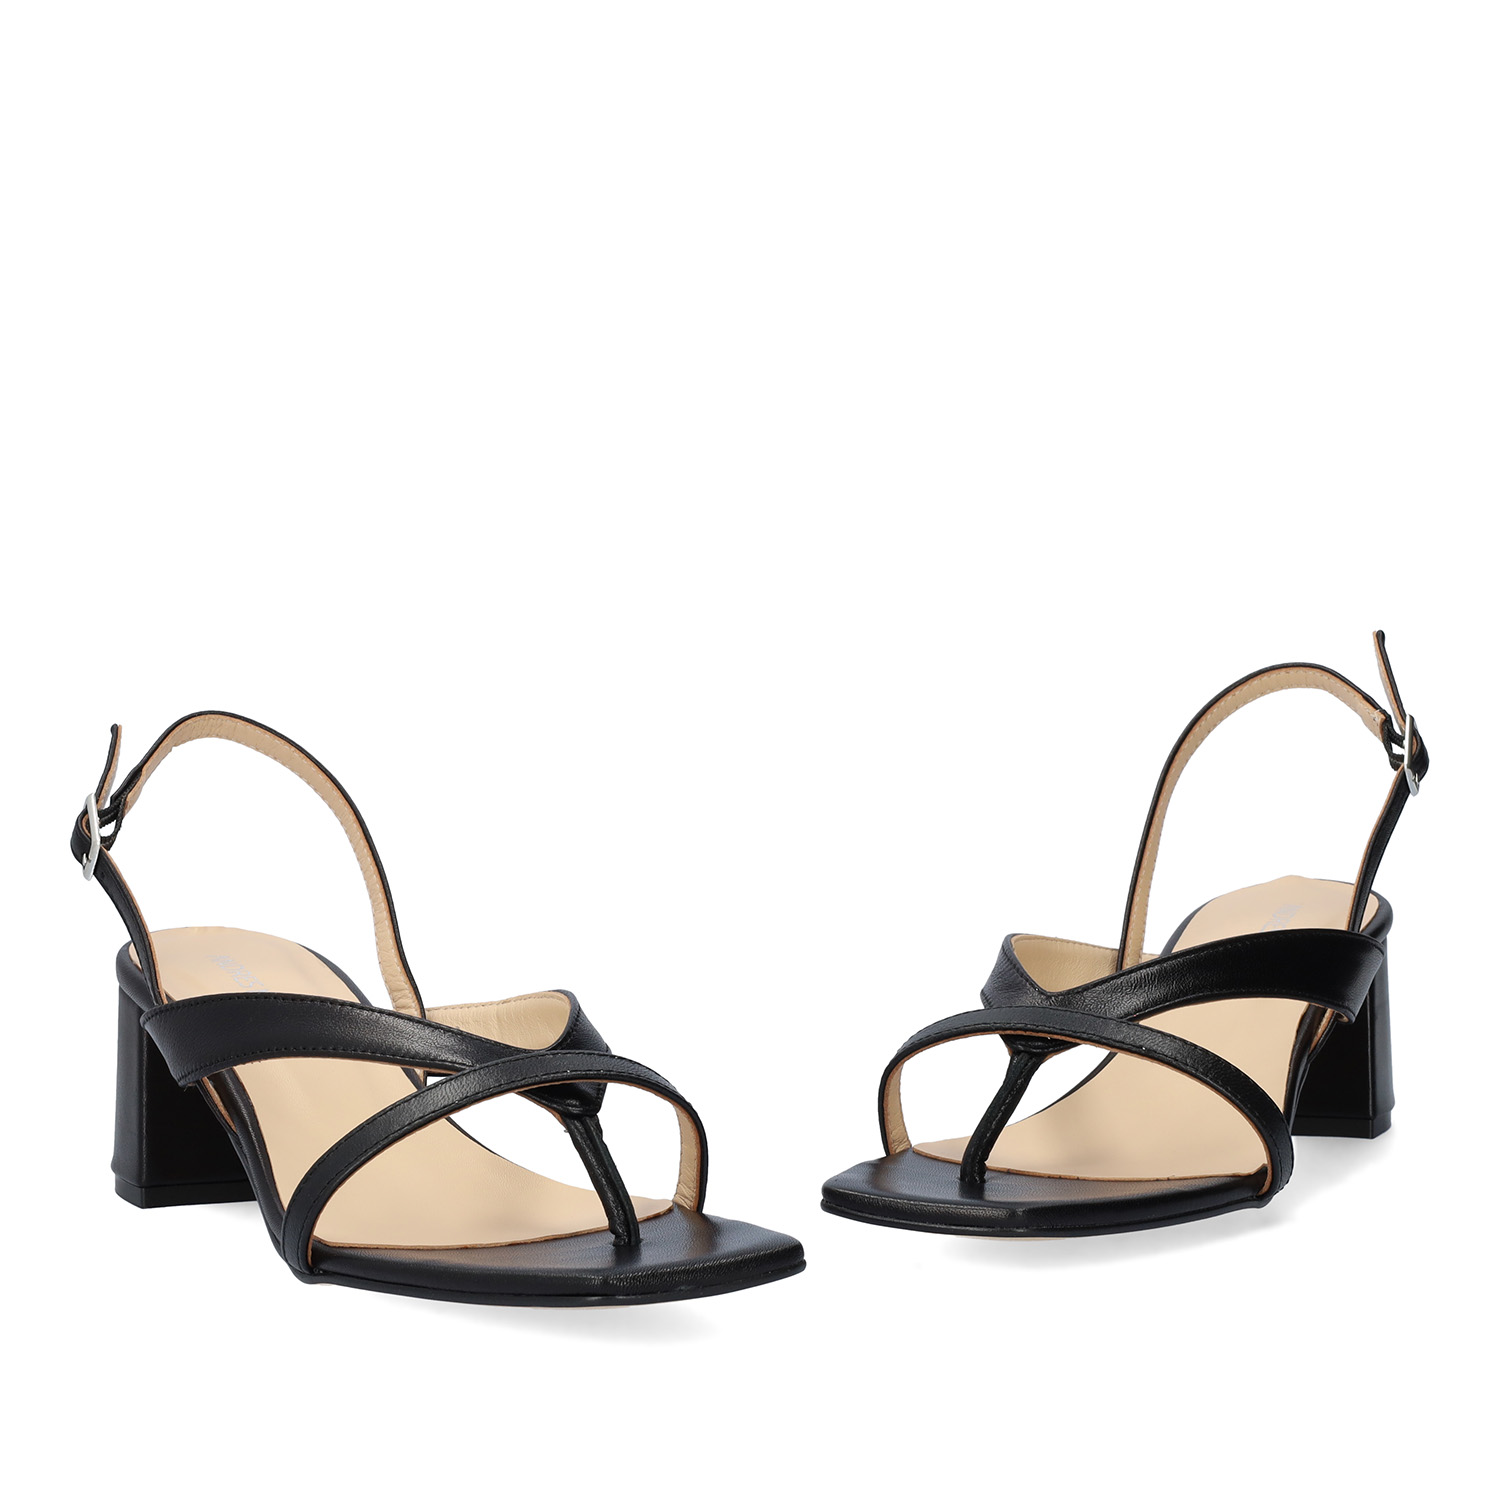 Heeled sandals in black leather 